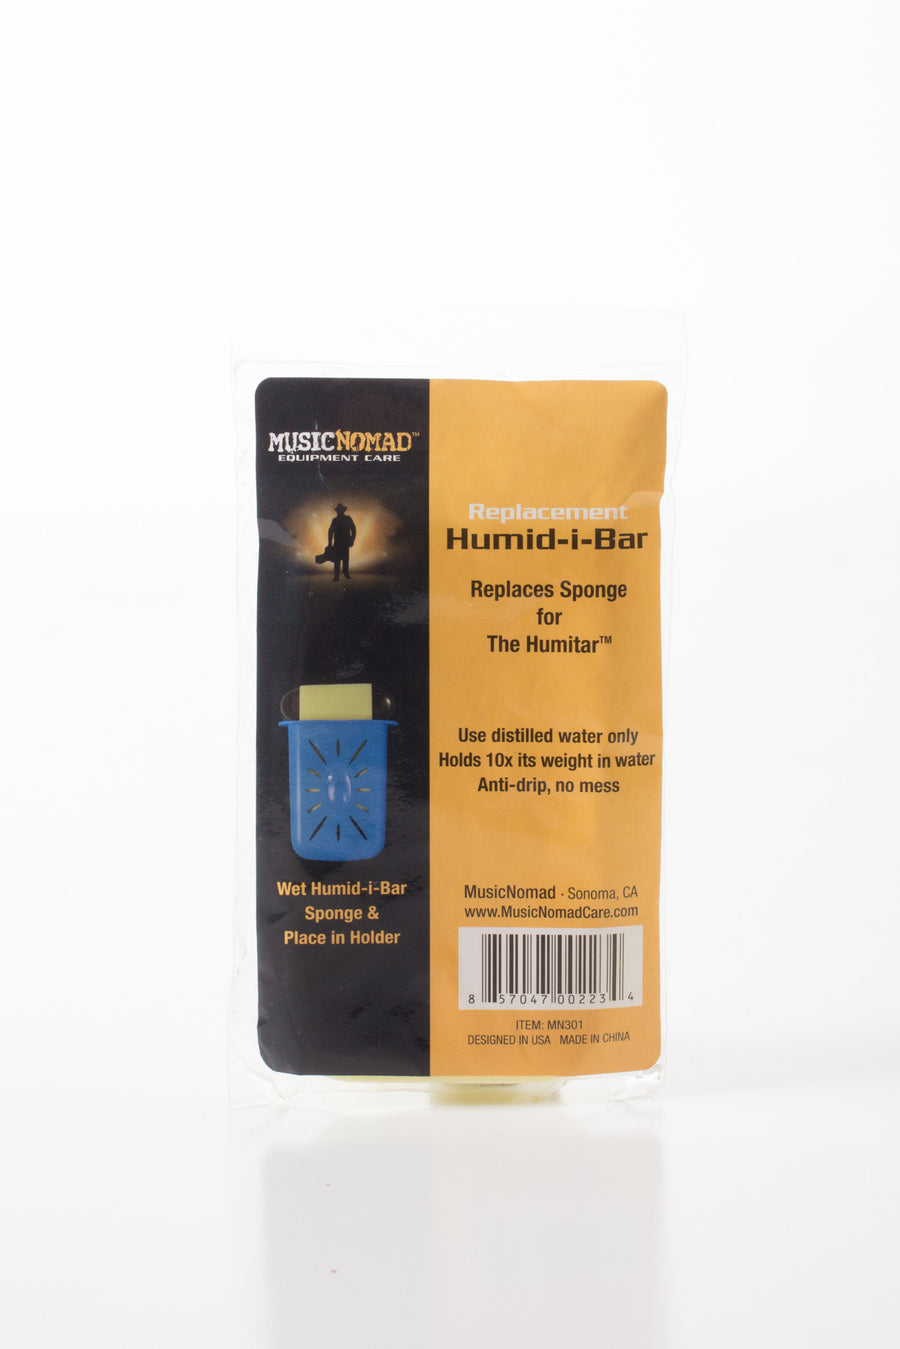 Music Nomad Replacement Humid-i-Bar Sponge for the Humitar Humidifier MN301